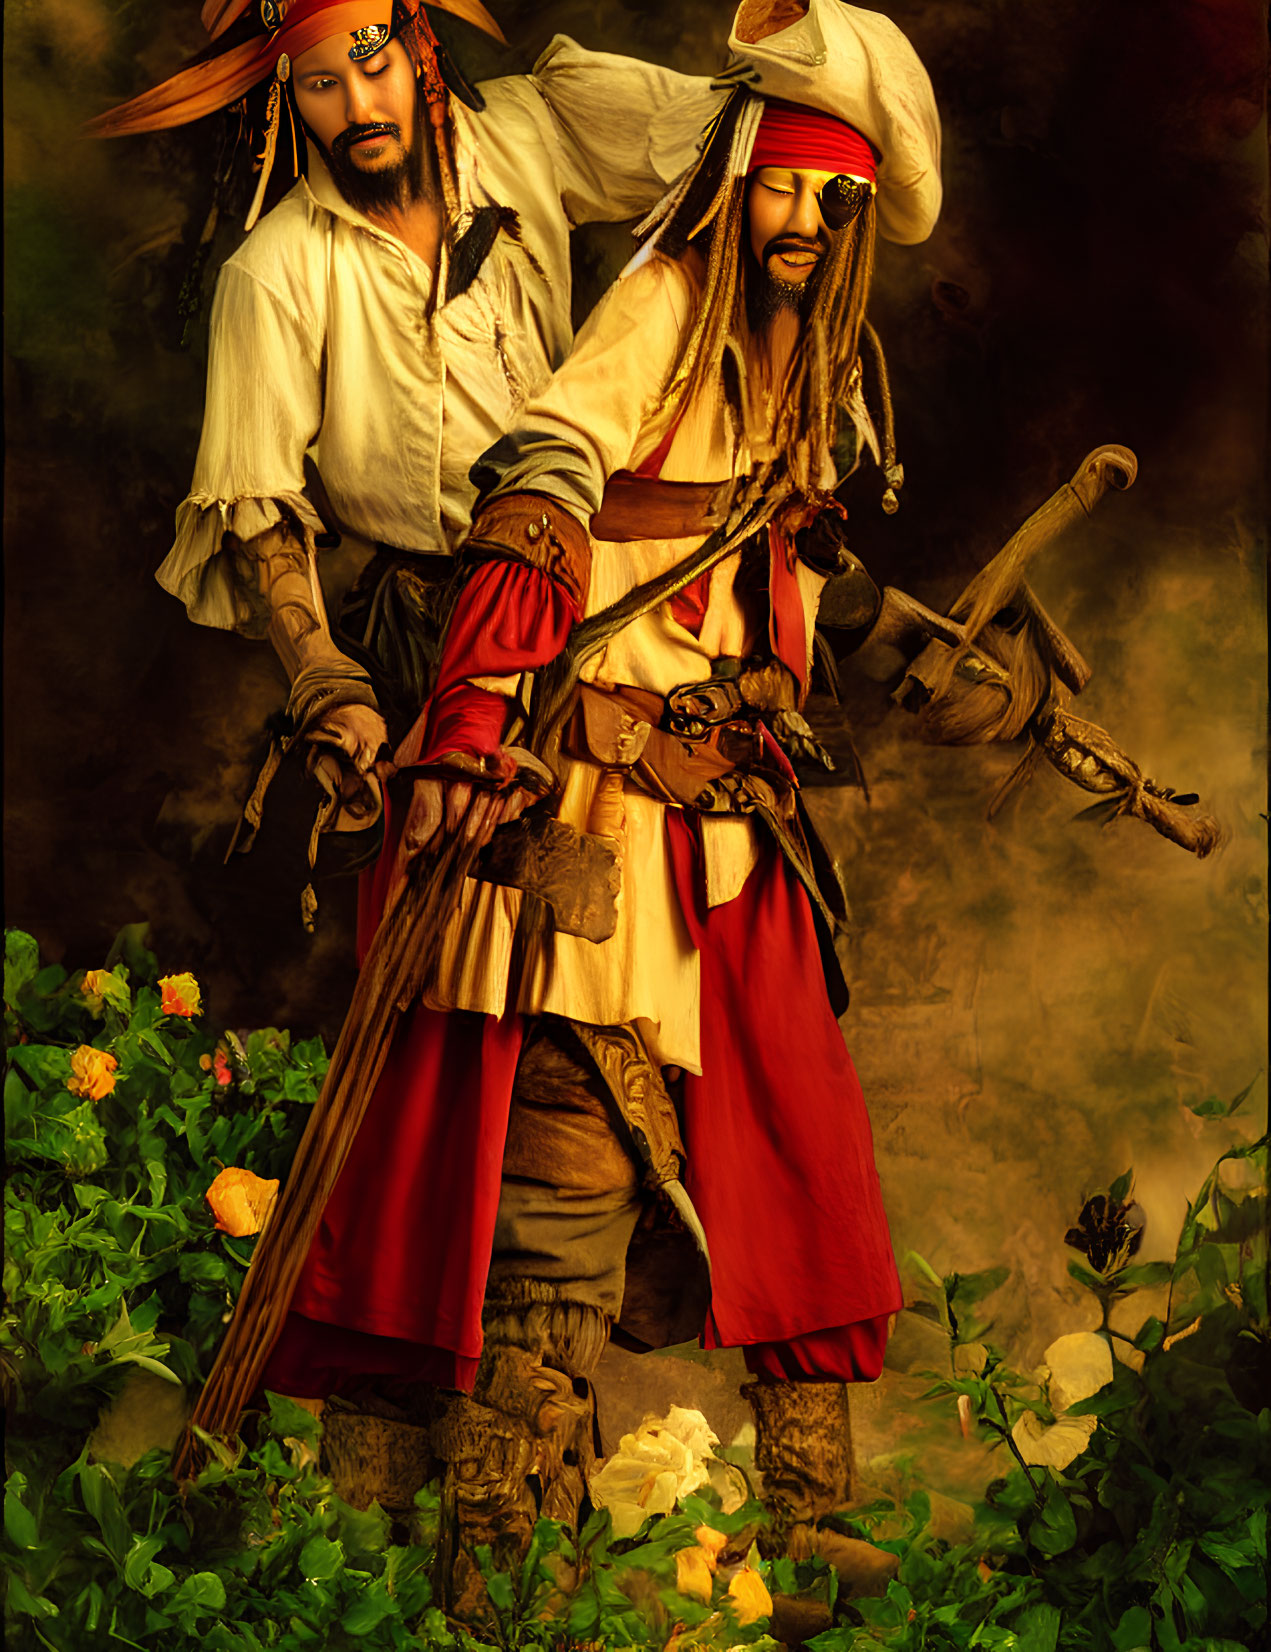 Pair of pirates in elaborate costumes with swords among roses